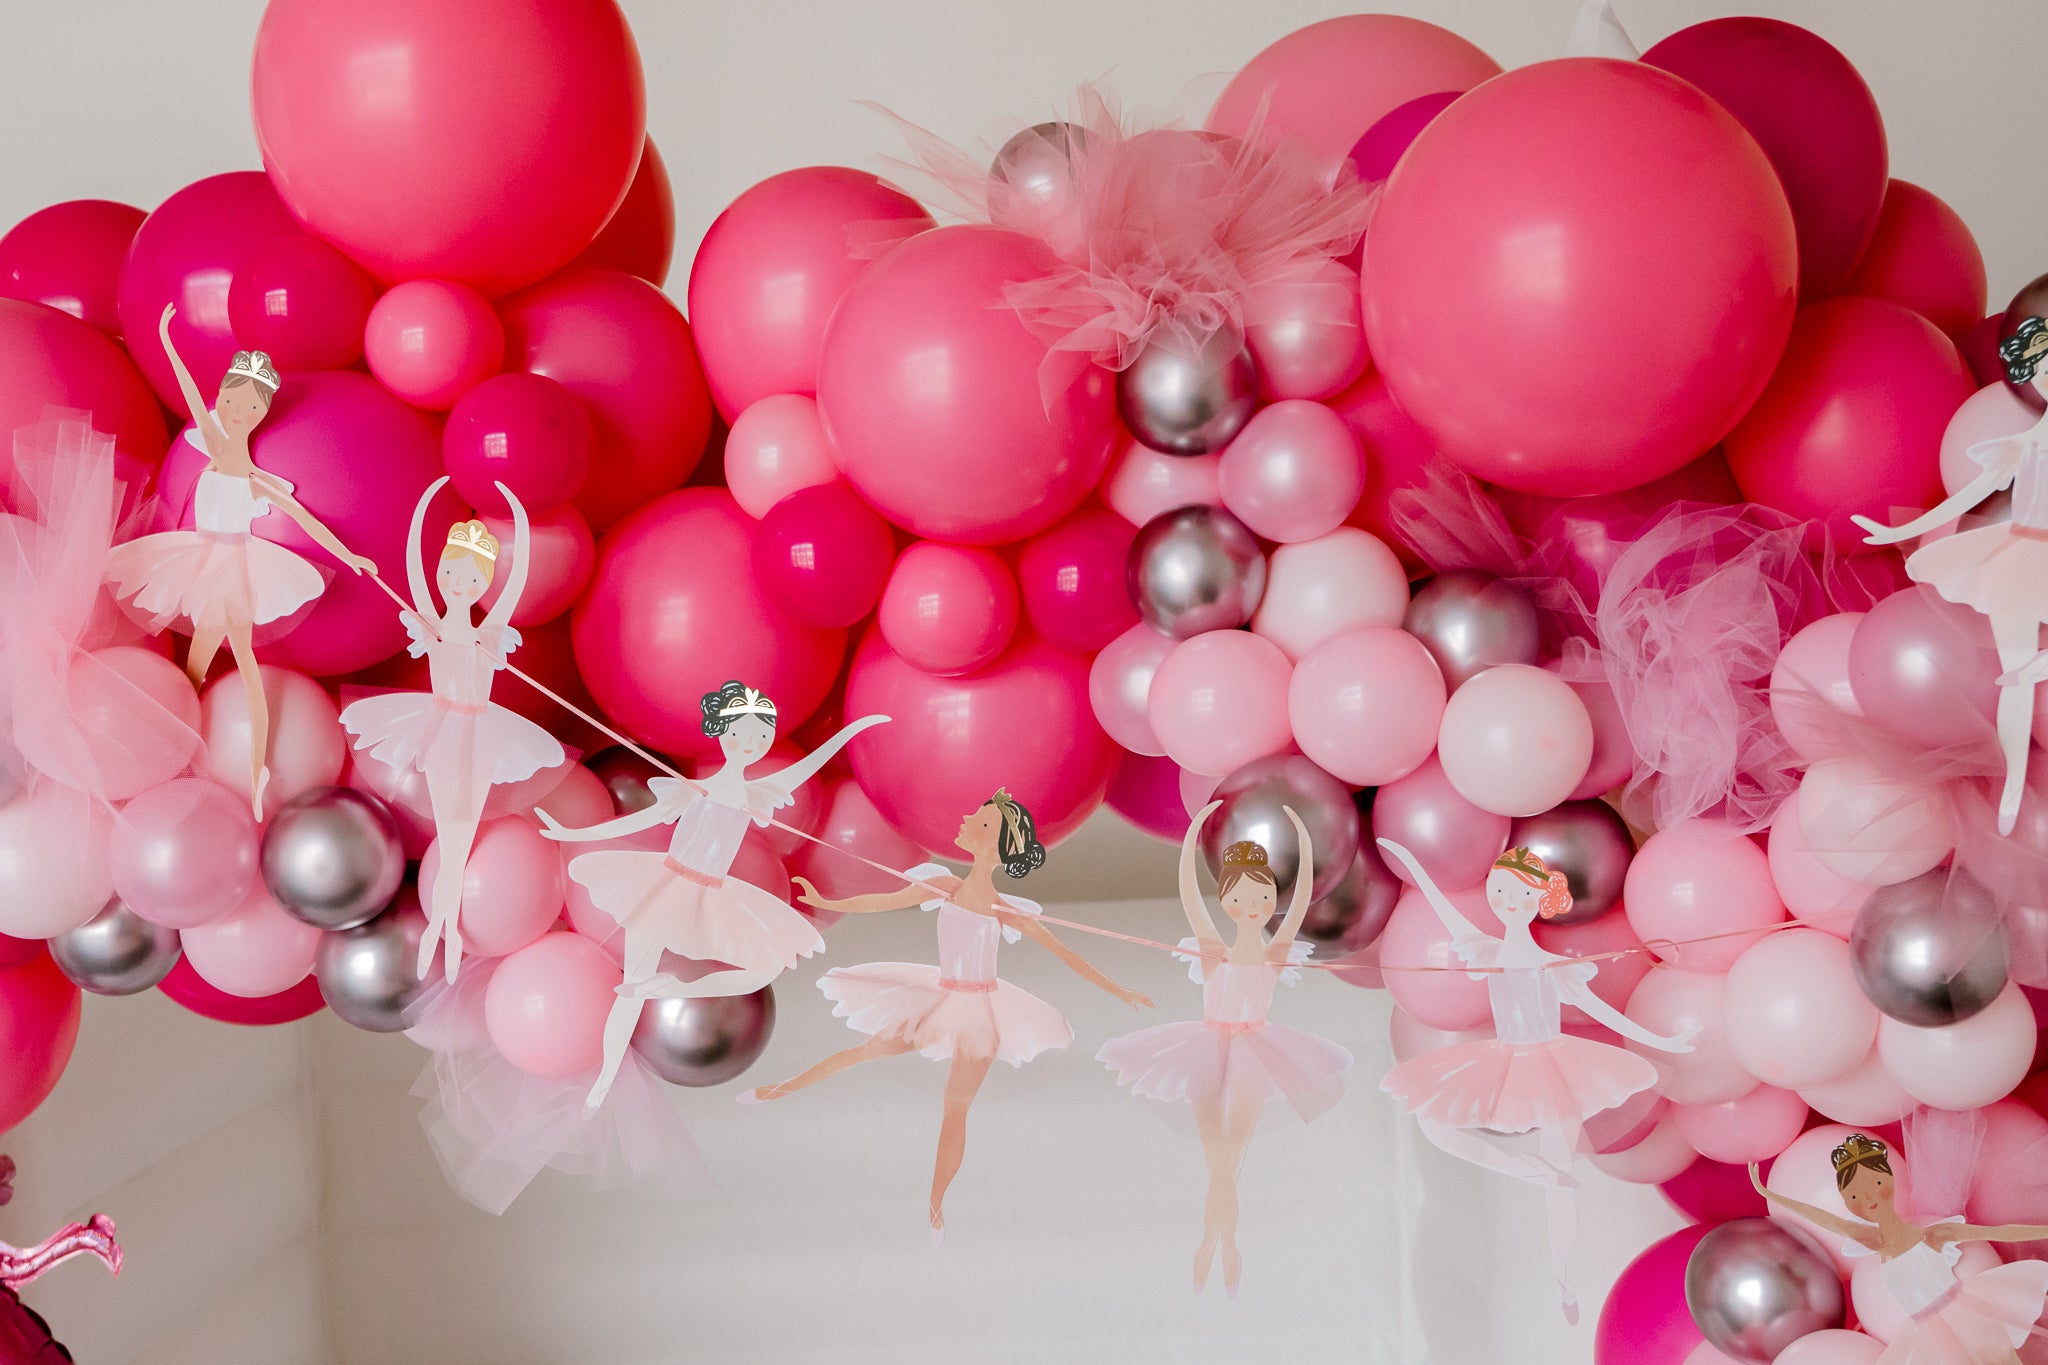 Ballerina birthday garland set up with a pink balloon garland for a ballet-themed birthday party.